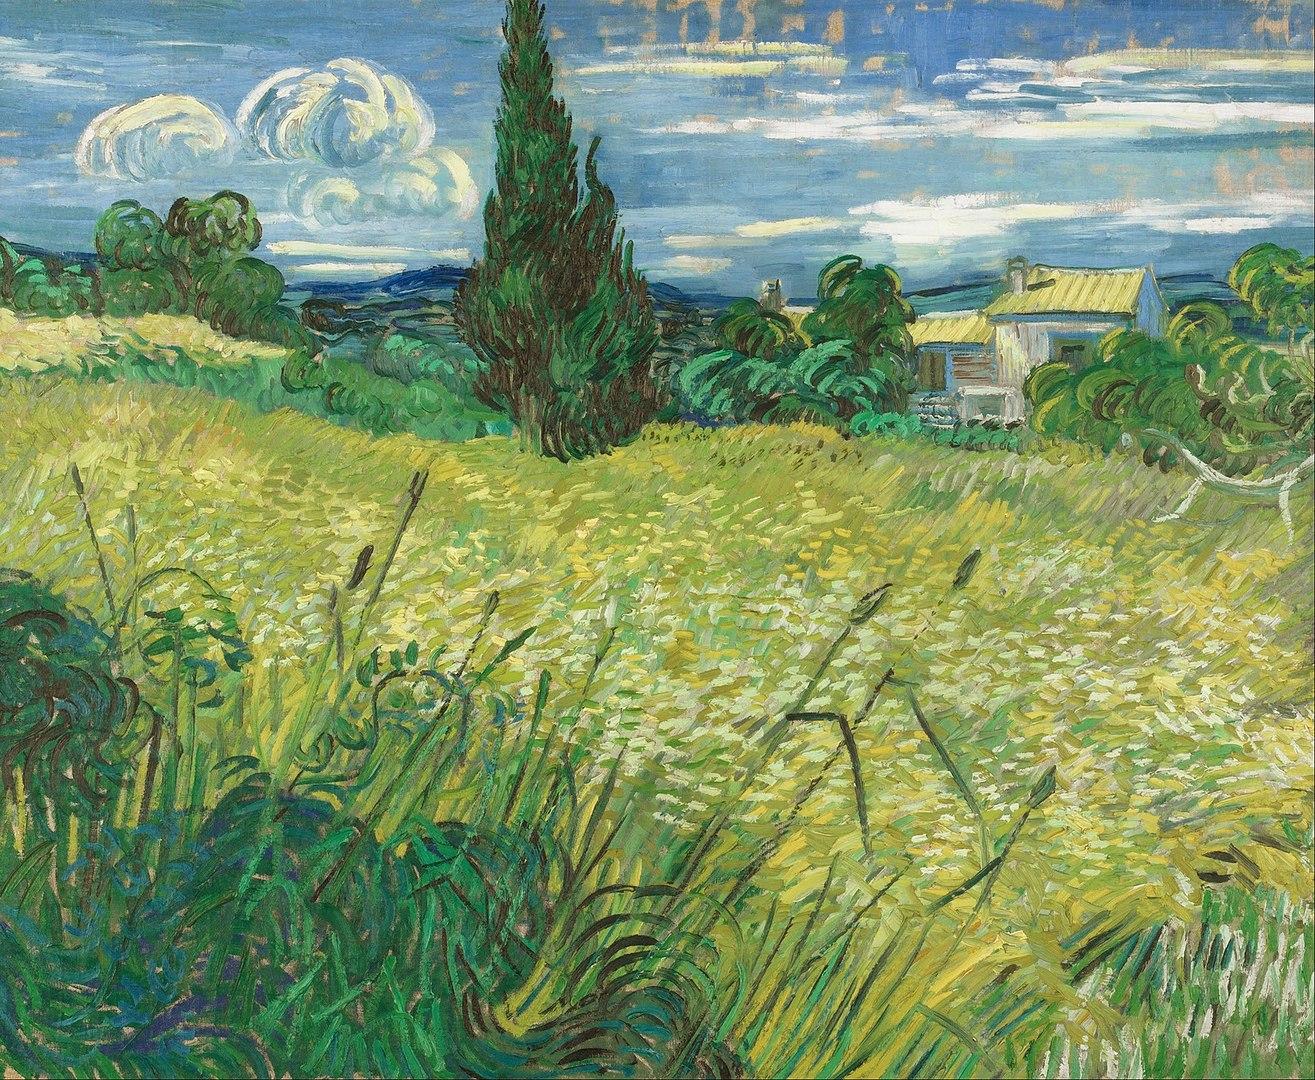 A Brief History Of Van Gogh'S “Starry Night” | Art & Object